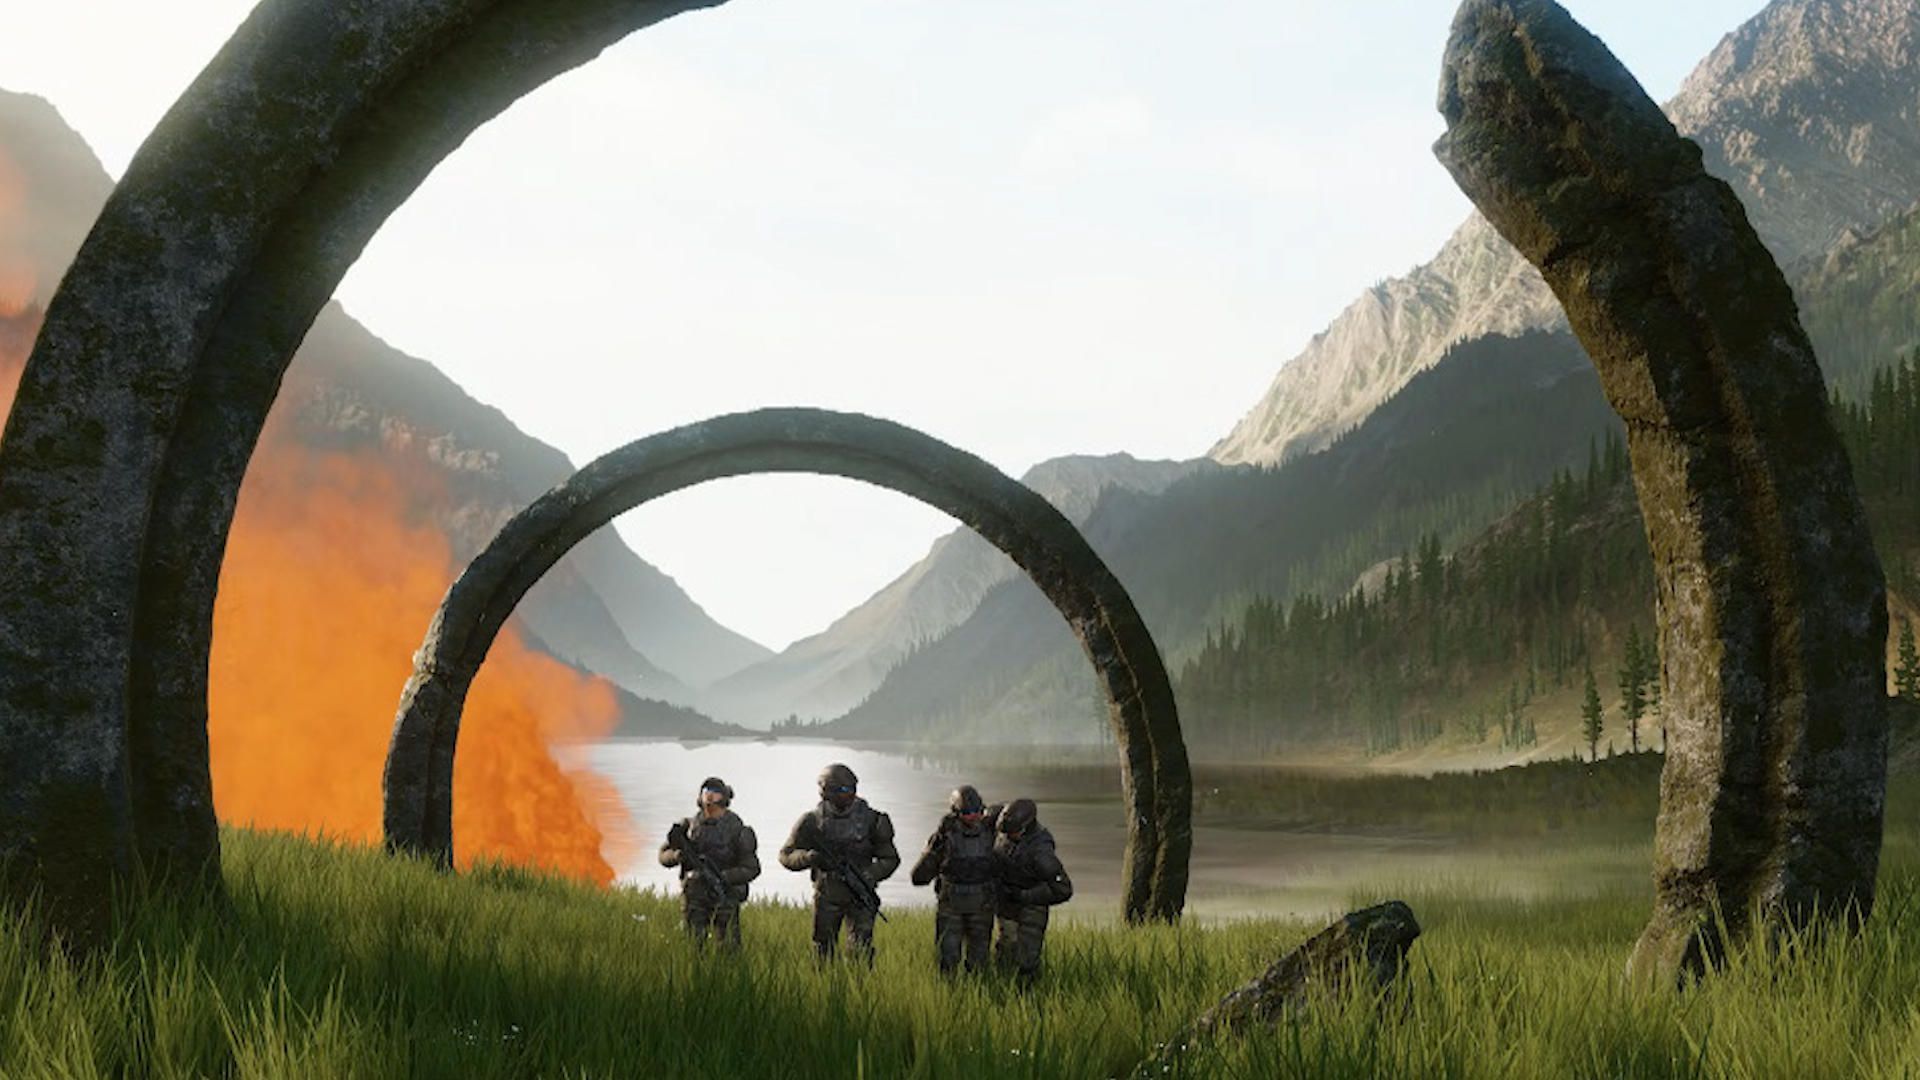 E3 2018: Watch the first Halo Infinite trailer for Xbox One and PC